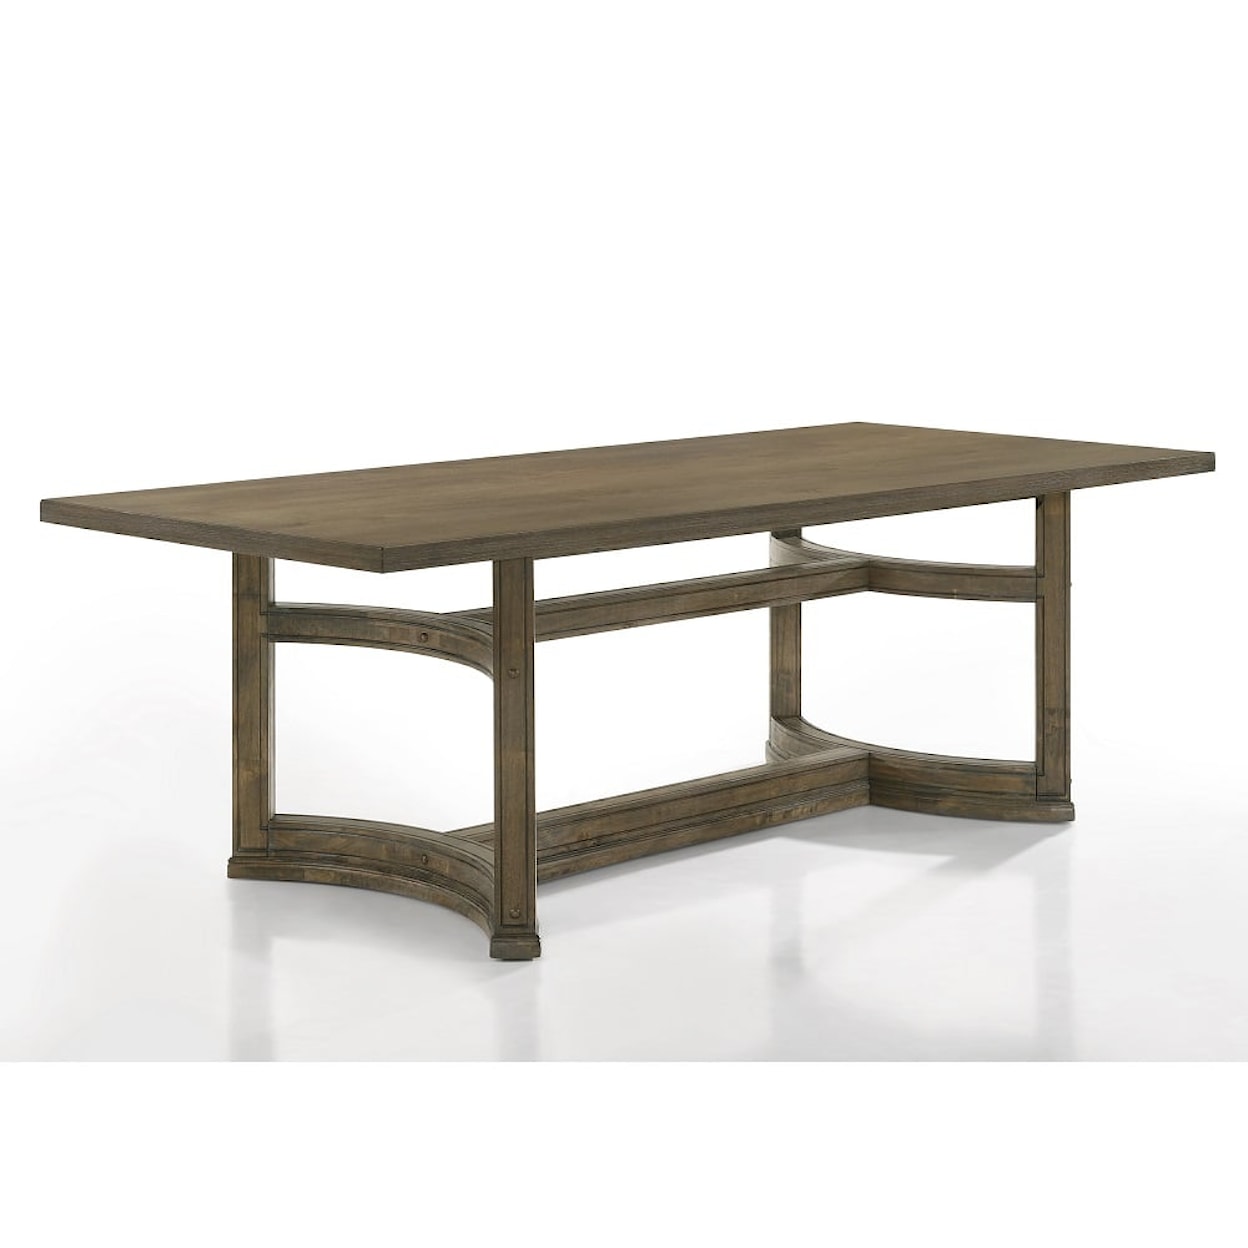 Acme Furniture Parfield Dining Table - Top